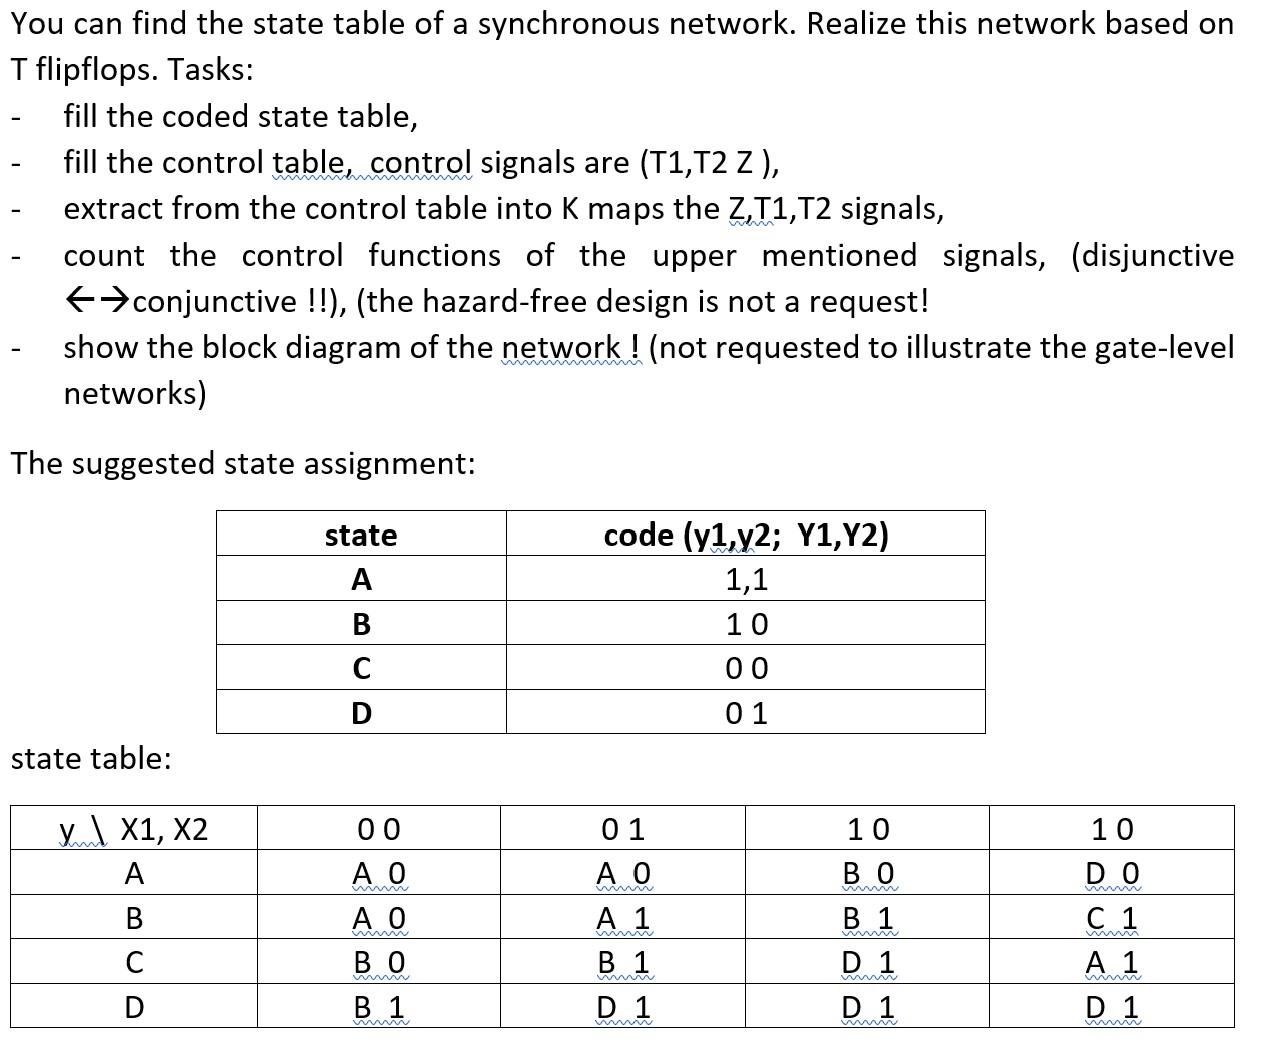 You can find the state table of a synchronous network. Realize this network based on T flipflops. Tasks: fill